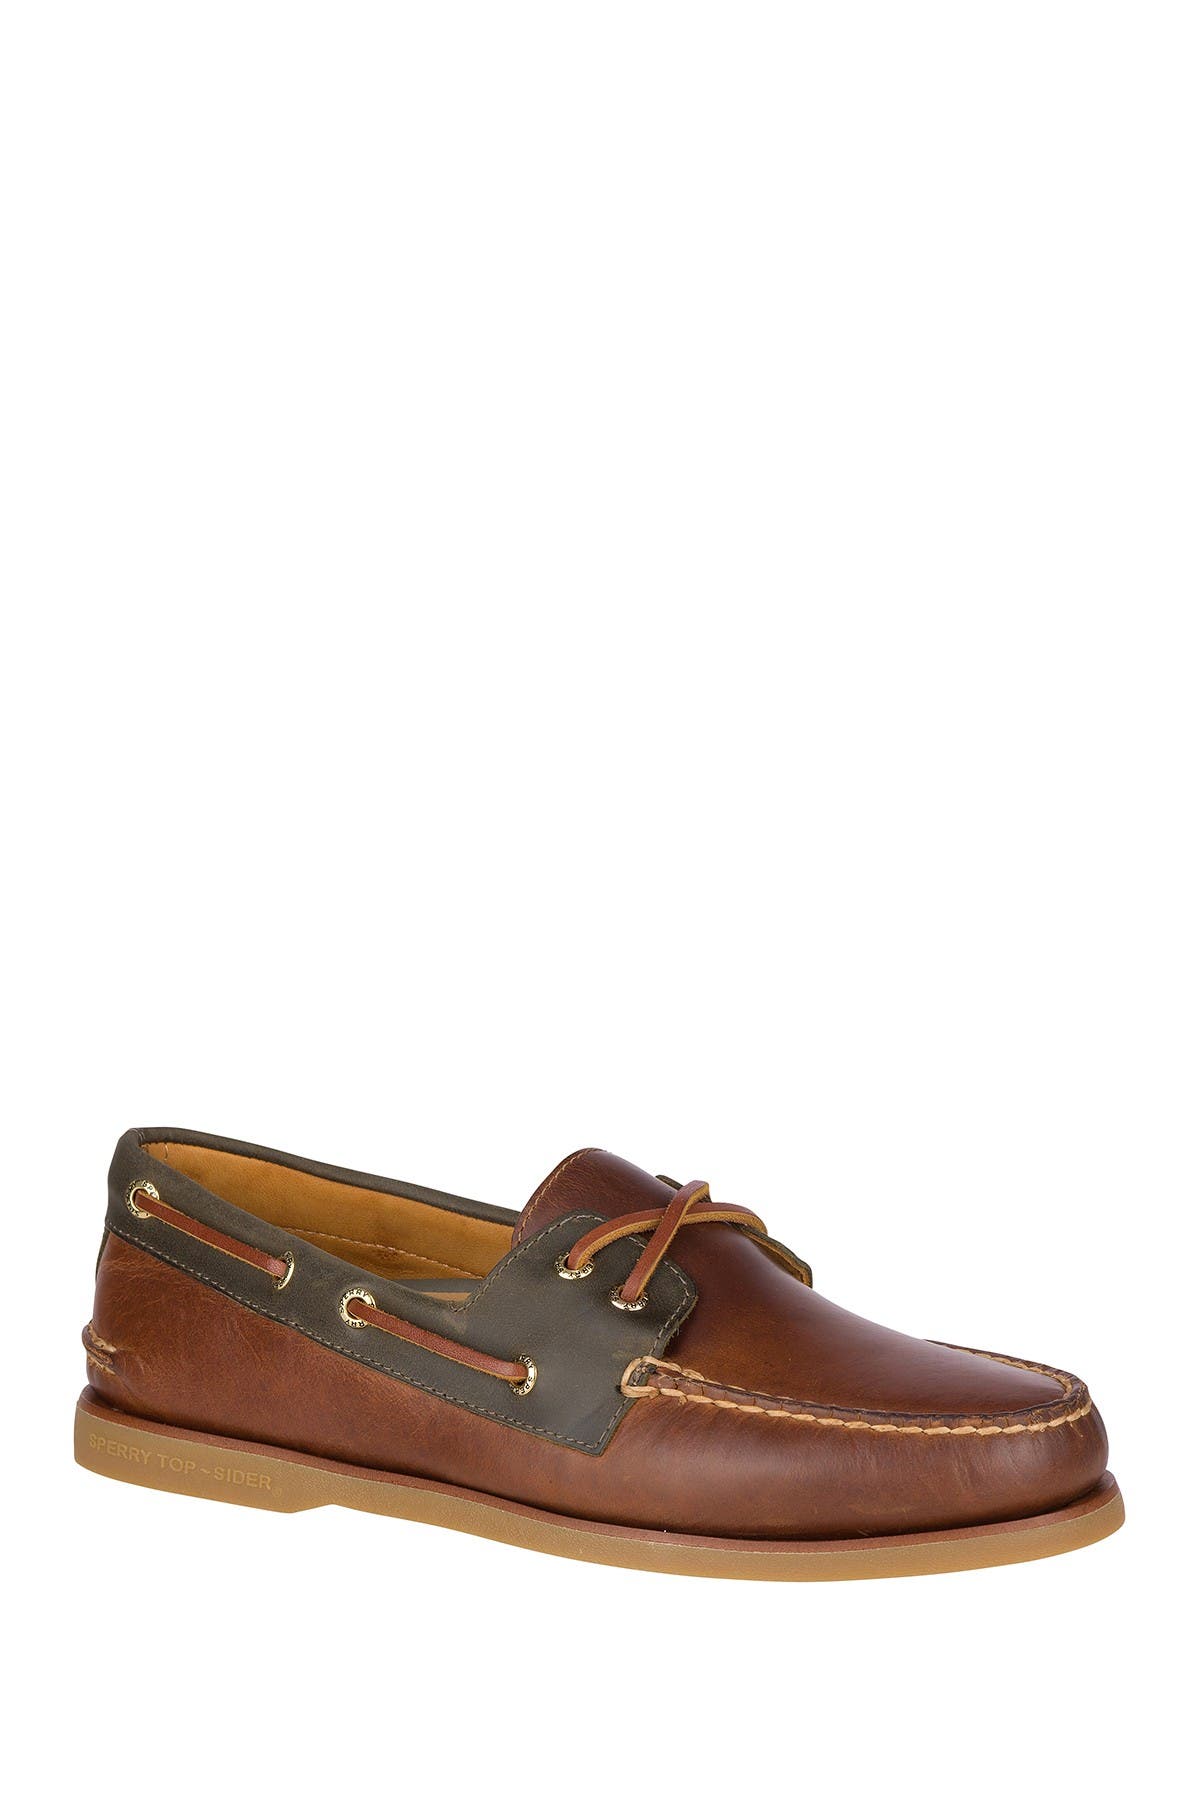 mens leather boat shoes sale